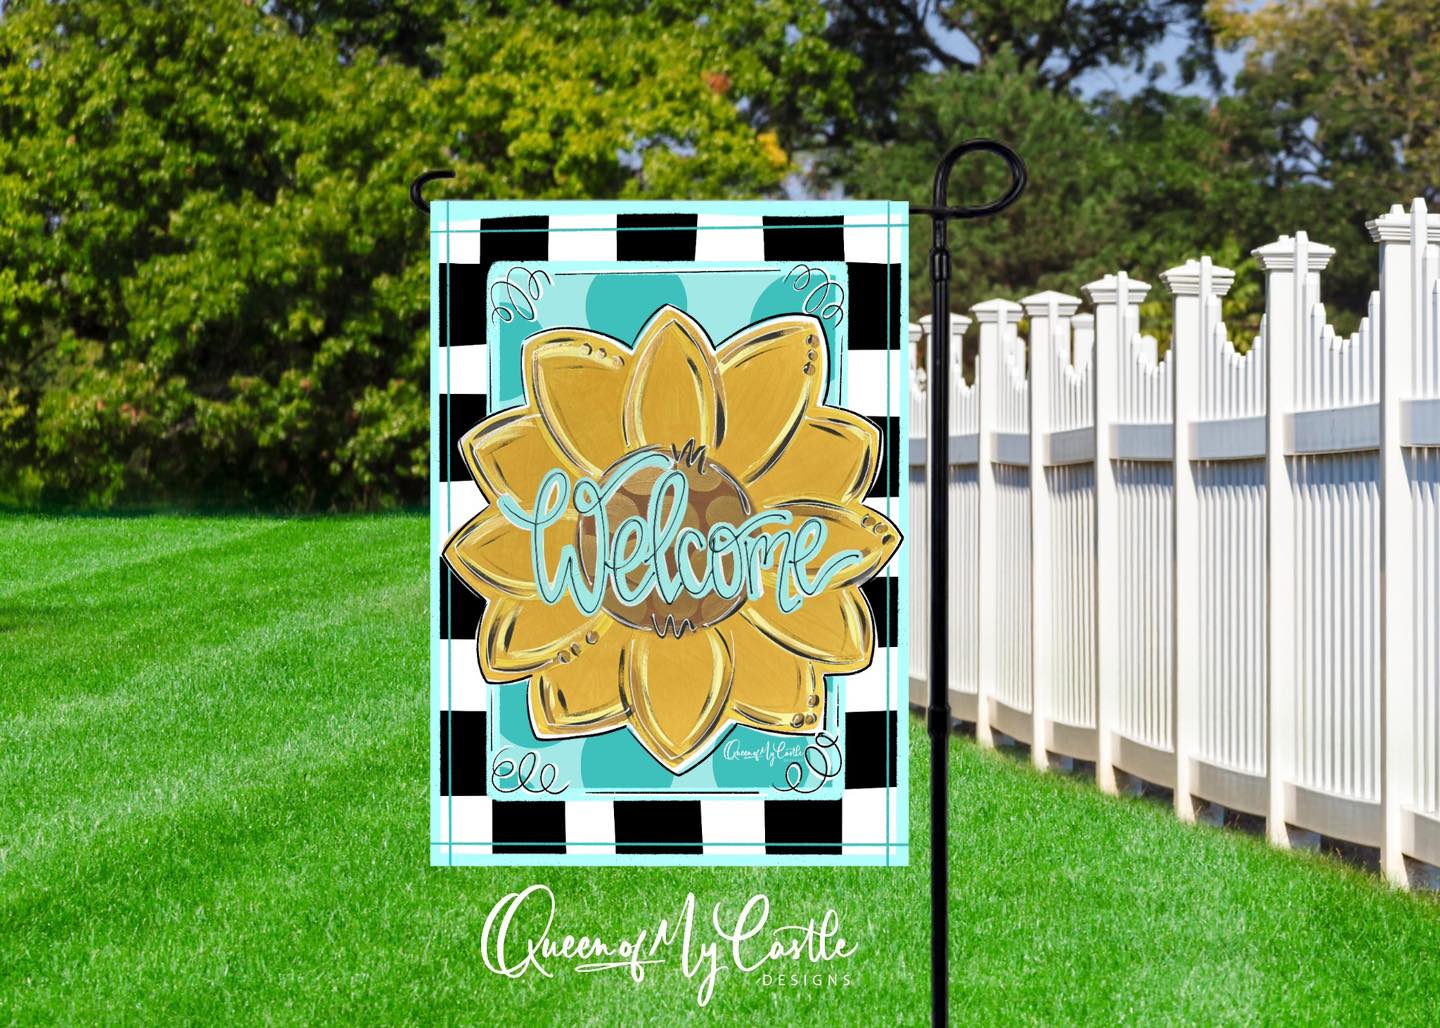 Garden flag featuring a sunflower design with the text 